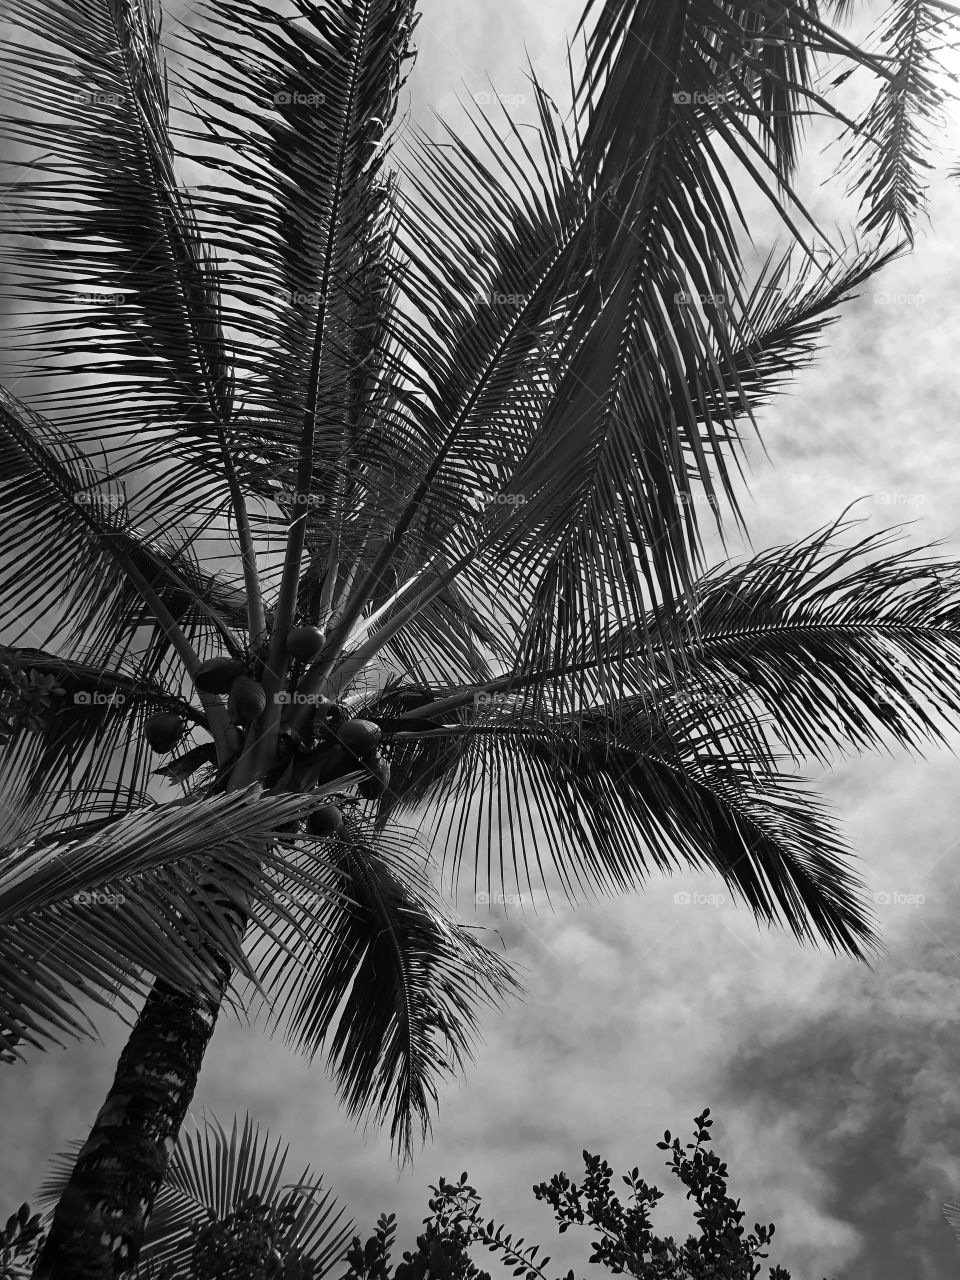 coconut tree with the sky in Hawaii - black and white